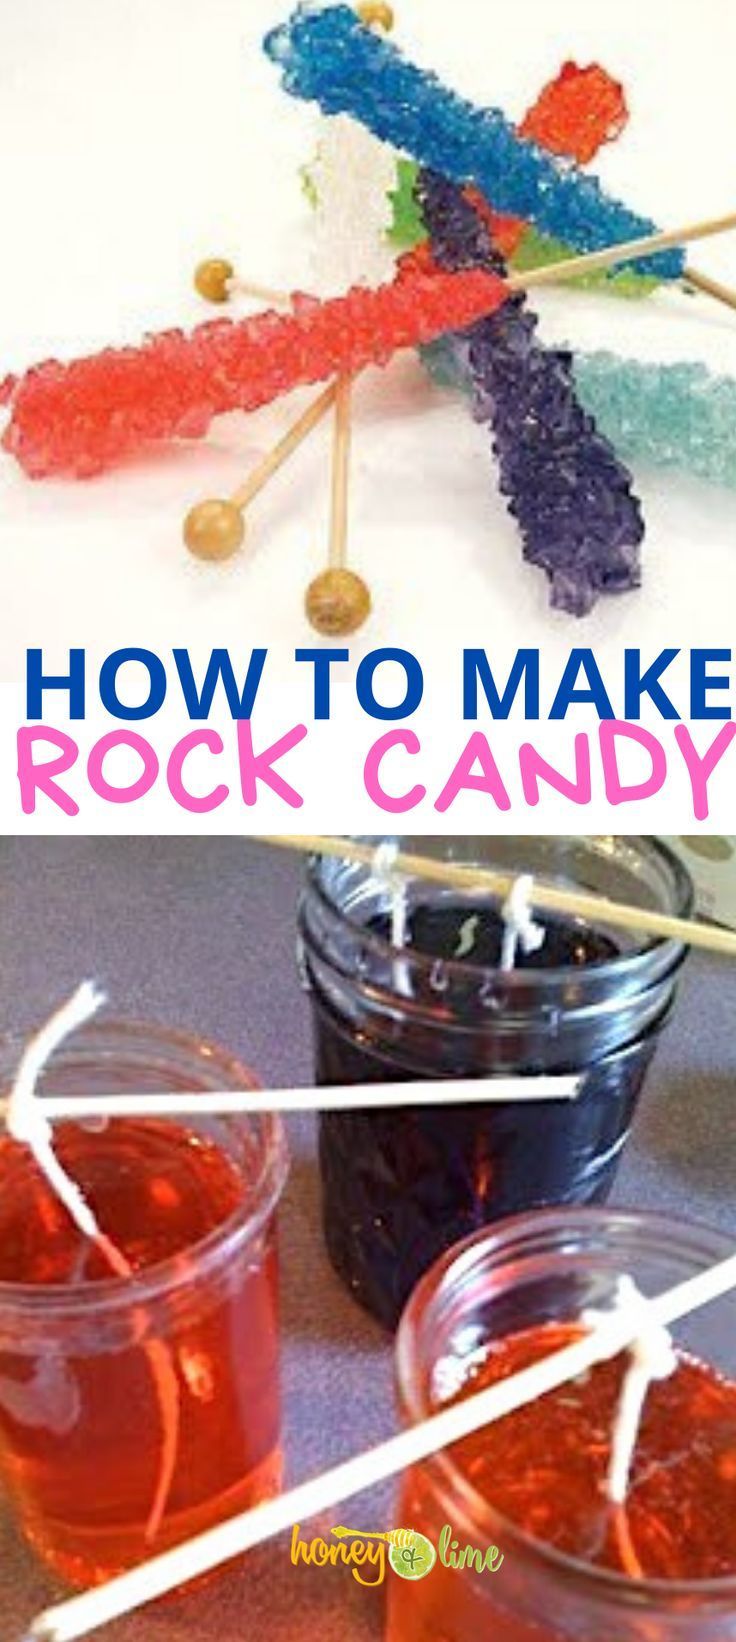 Science projects to do at home - make rock candy -   19 diy Projects for kids ideas